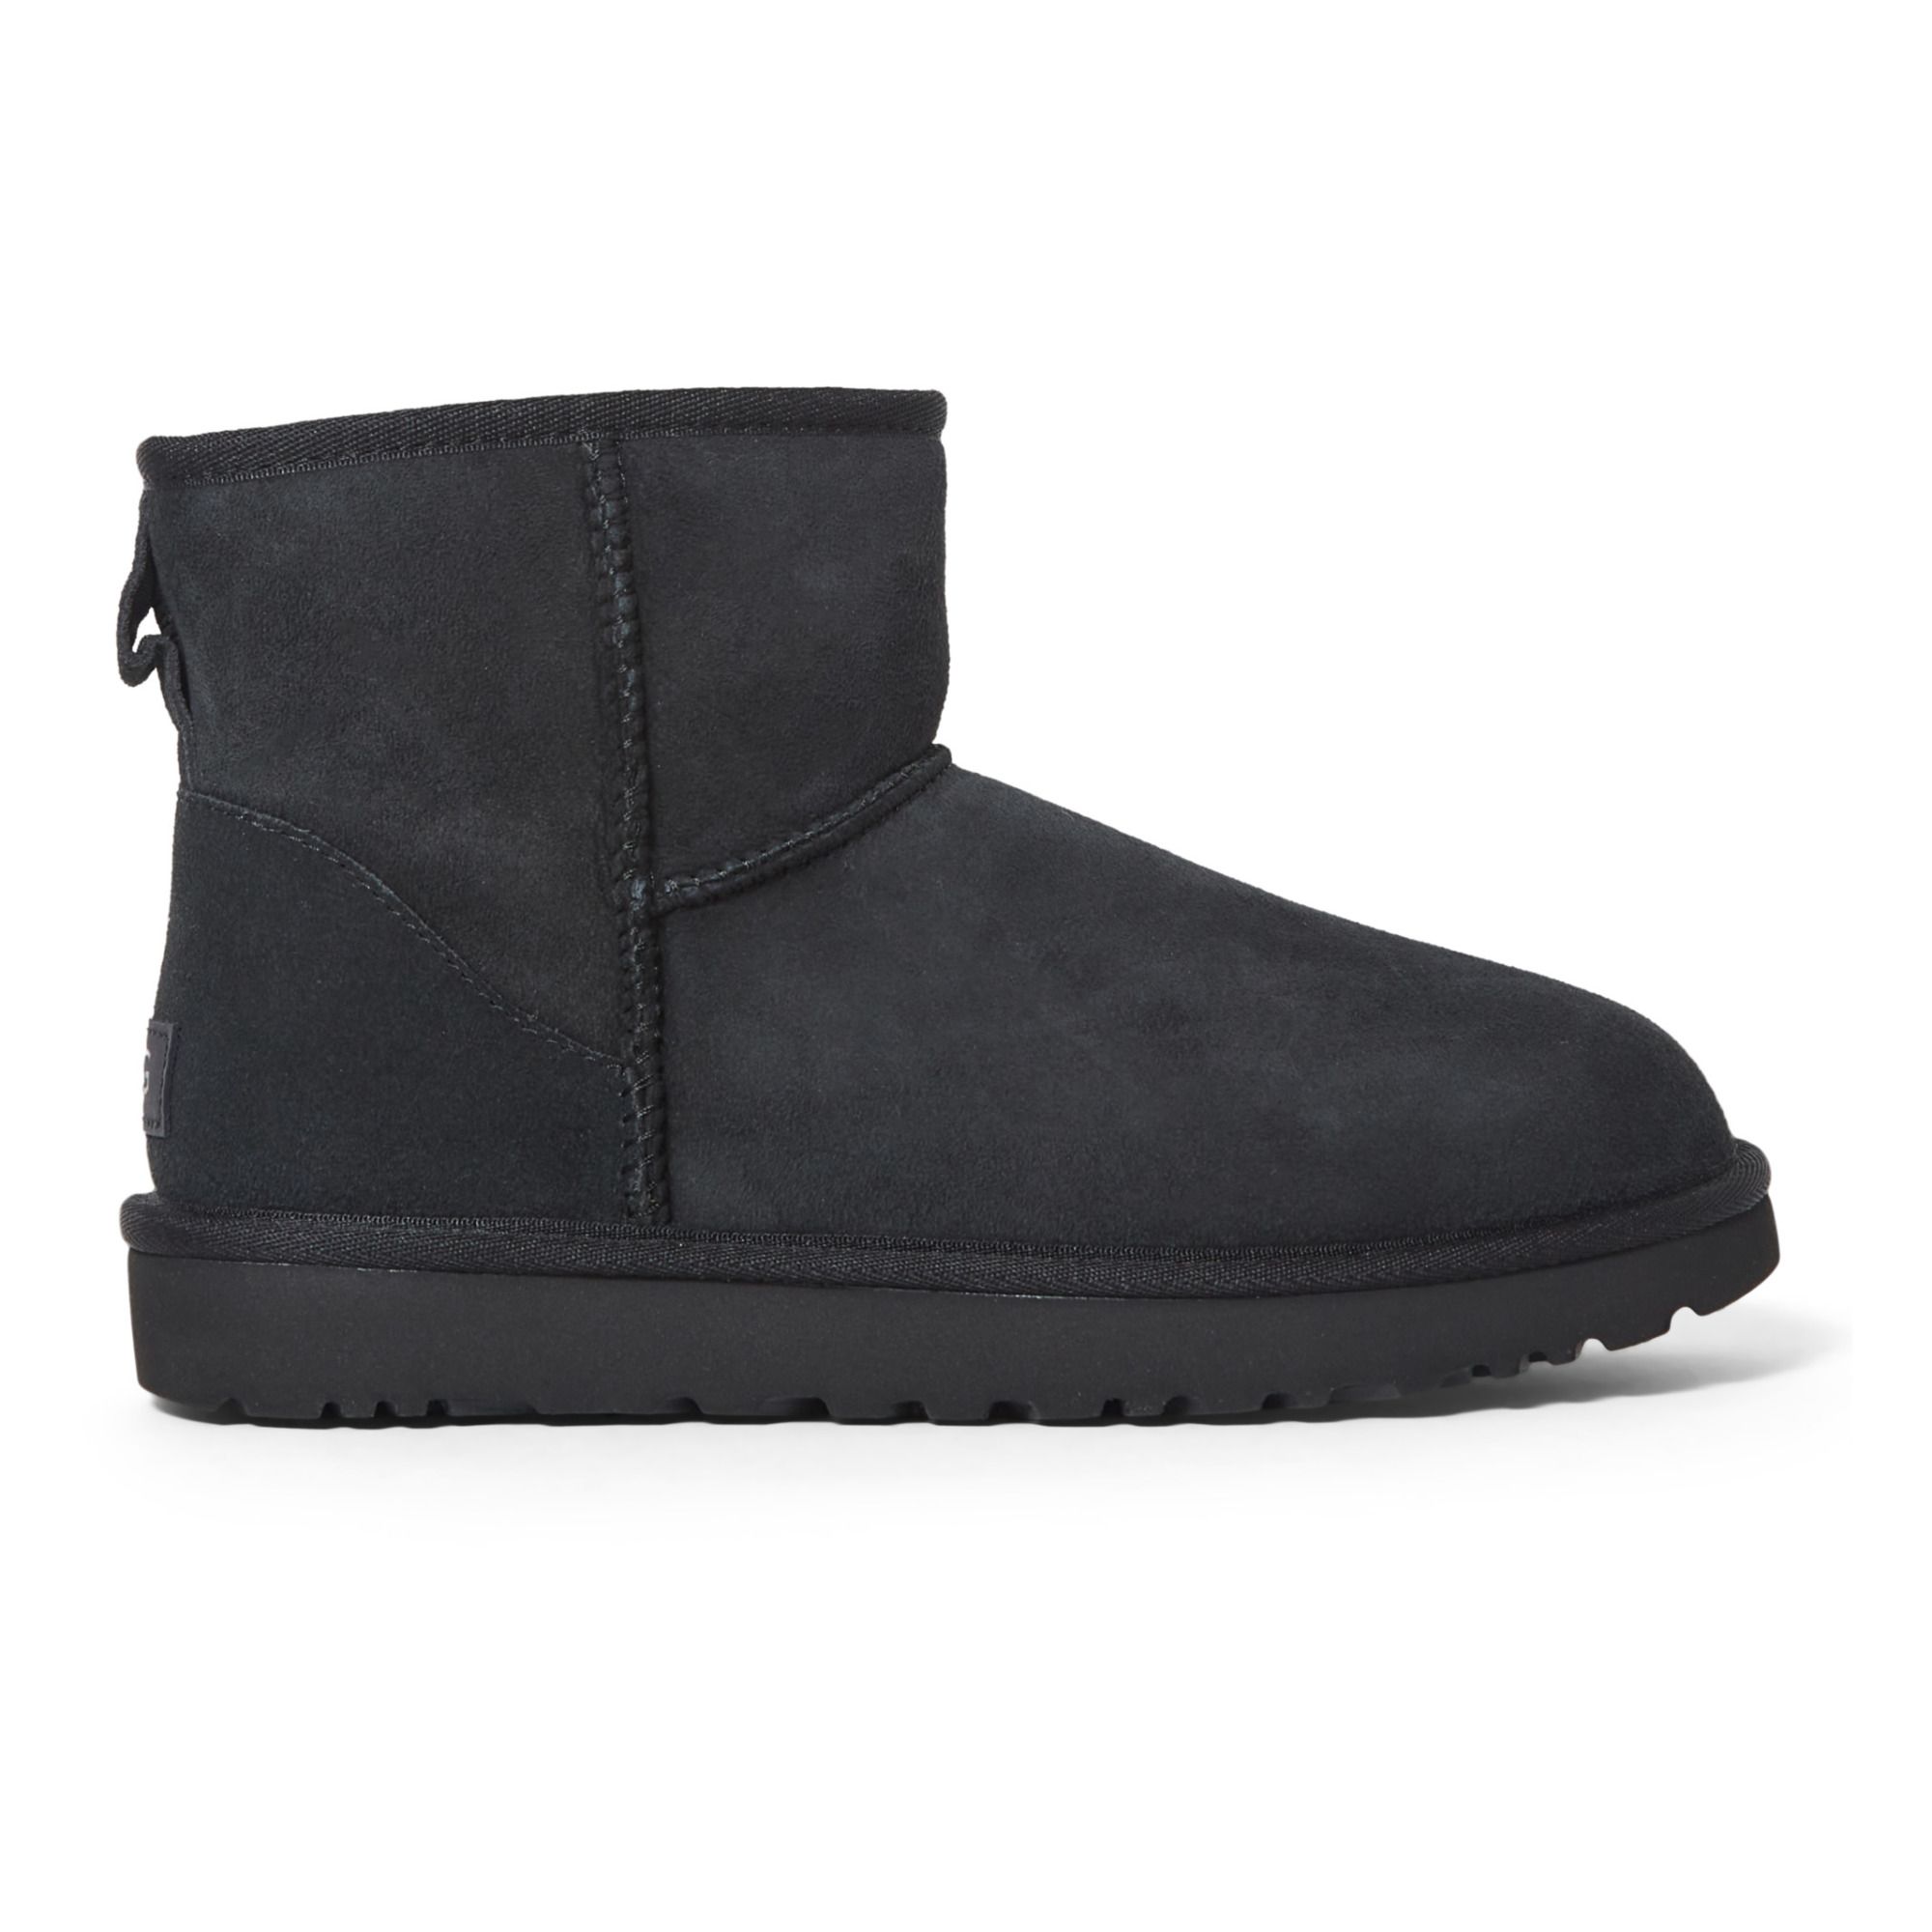 Ugg - Boots Classic Mini II - Collection Femme - Noir